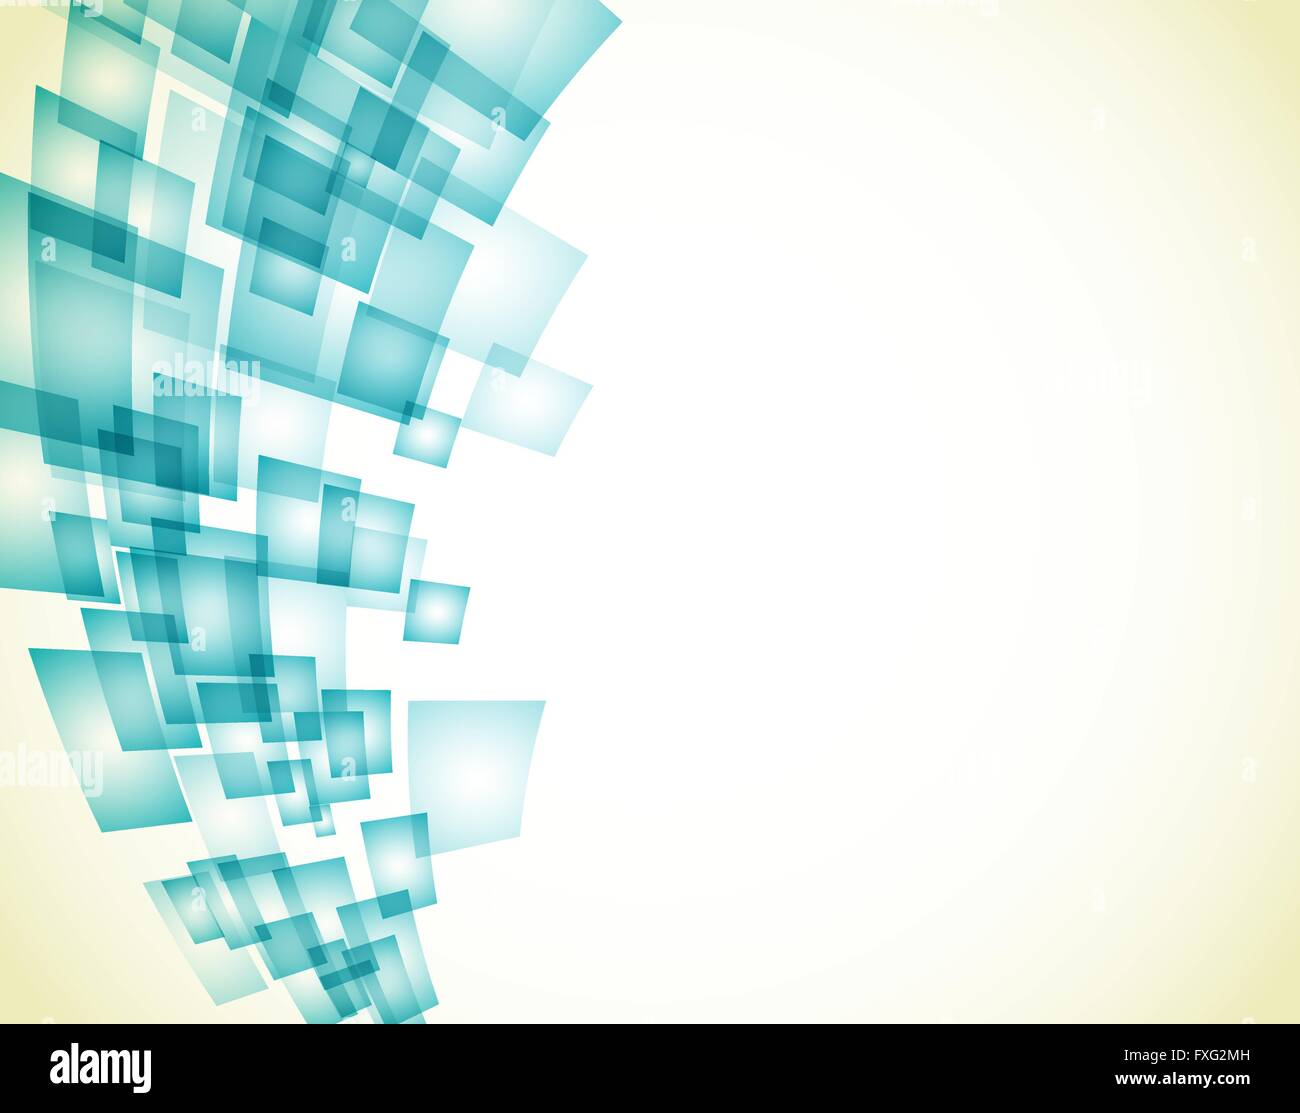 abstract background with transparent aqua shapes. vector Stock Vector